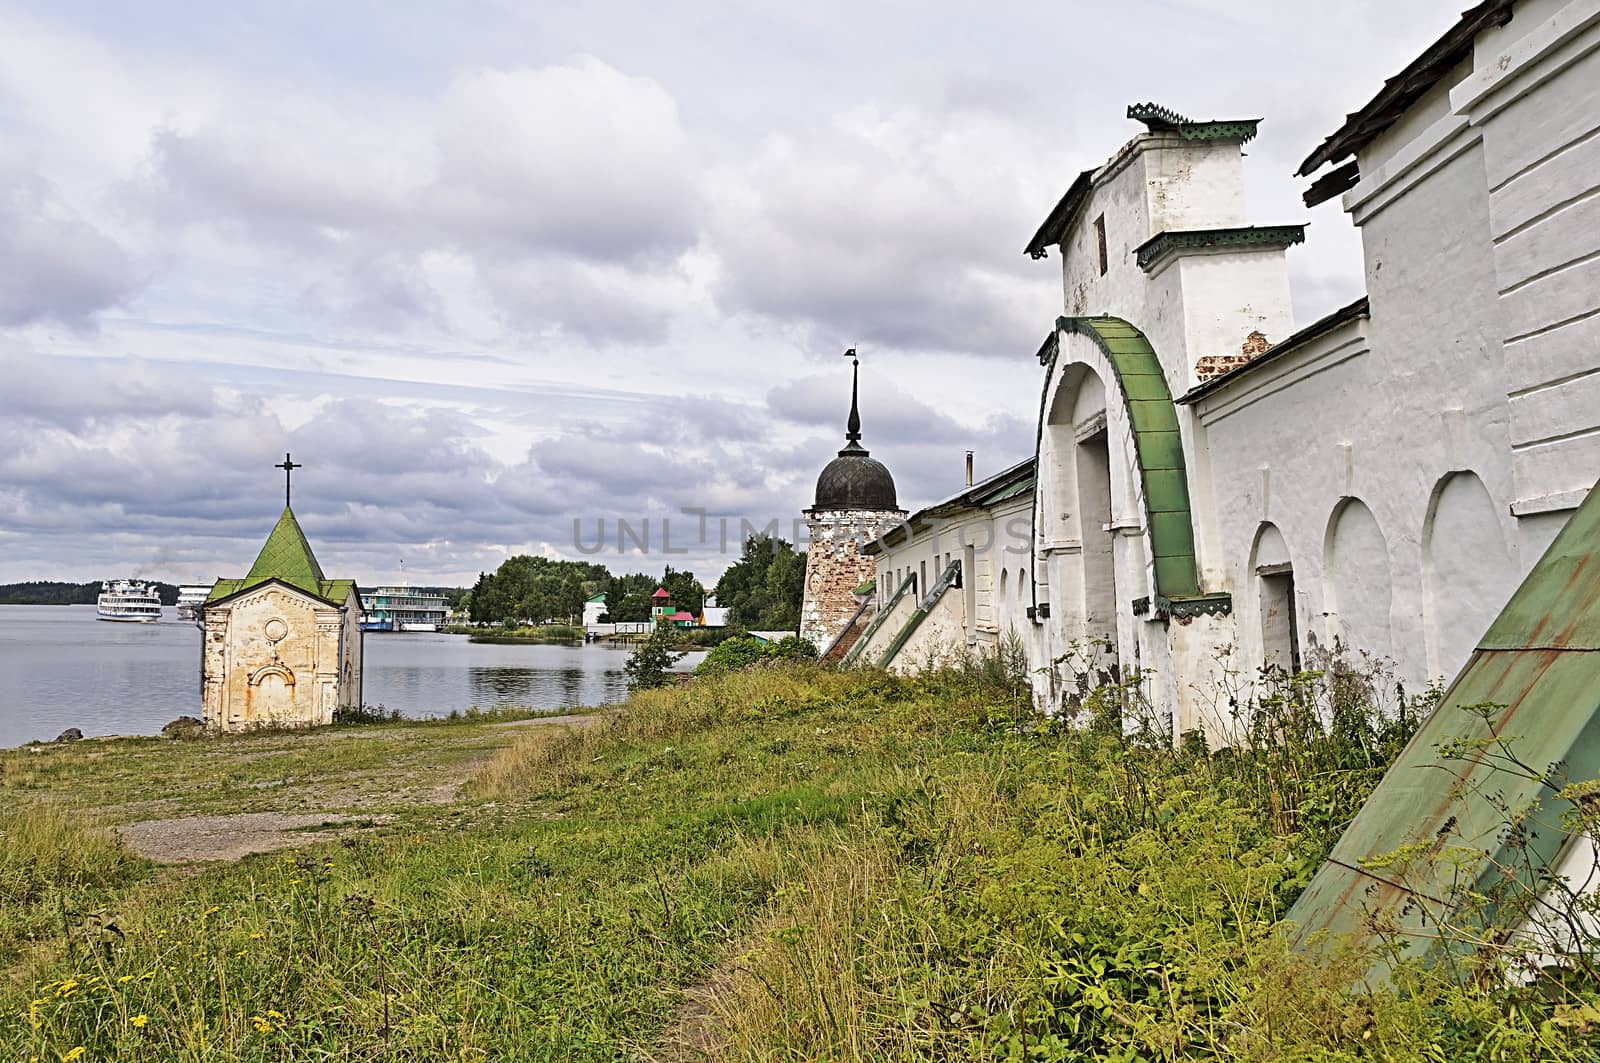 Resurrection Goritsky convent on the banks of the river Sheksna, north Russia